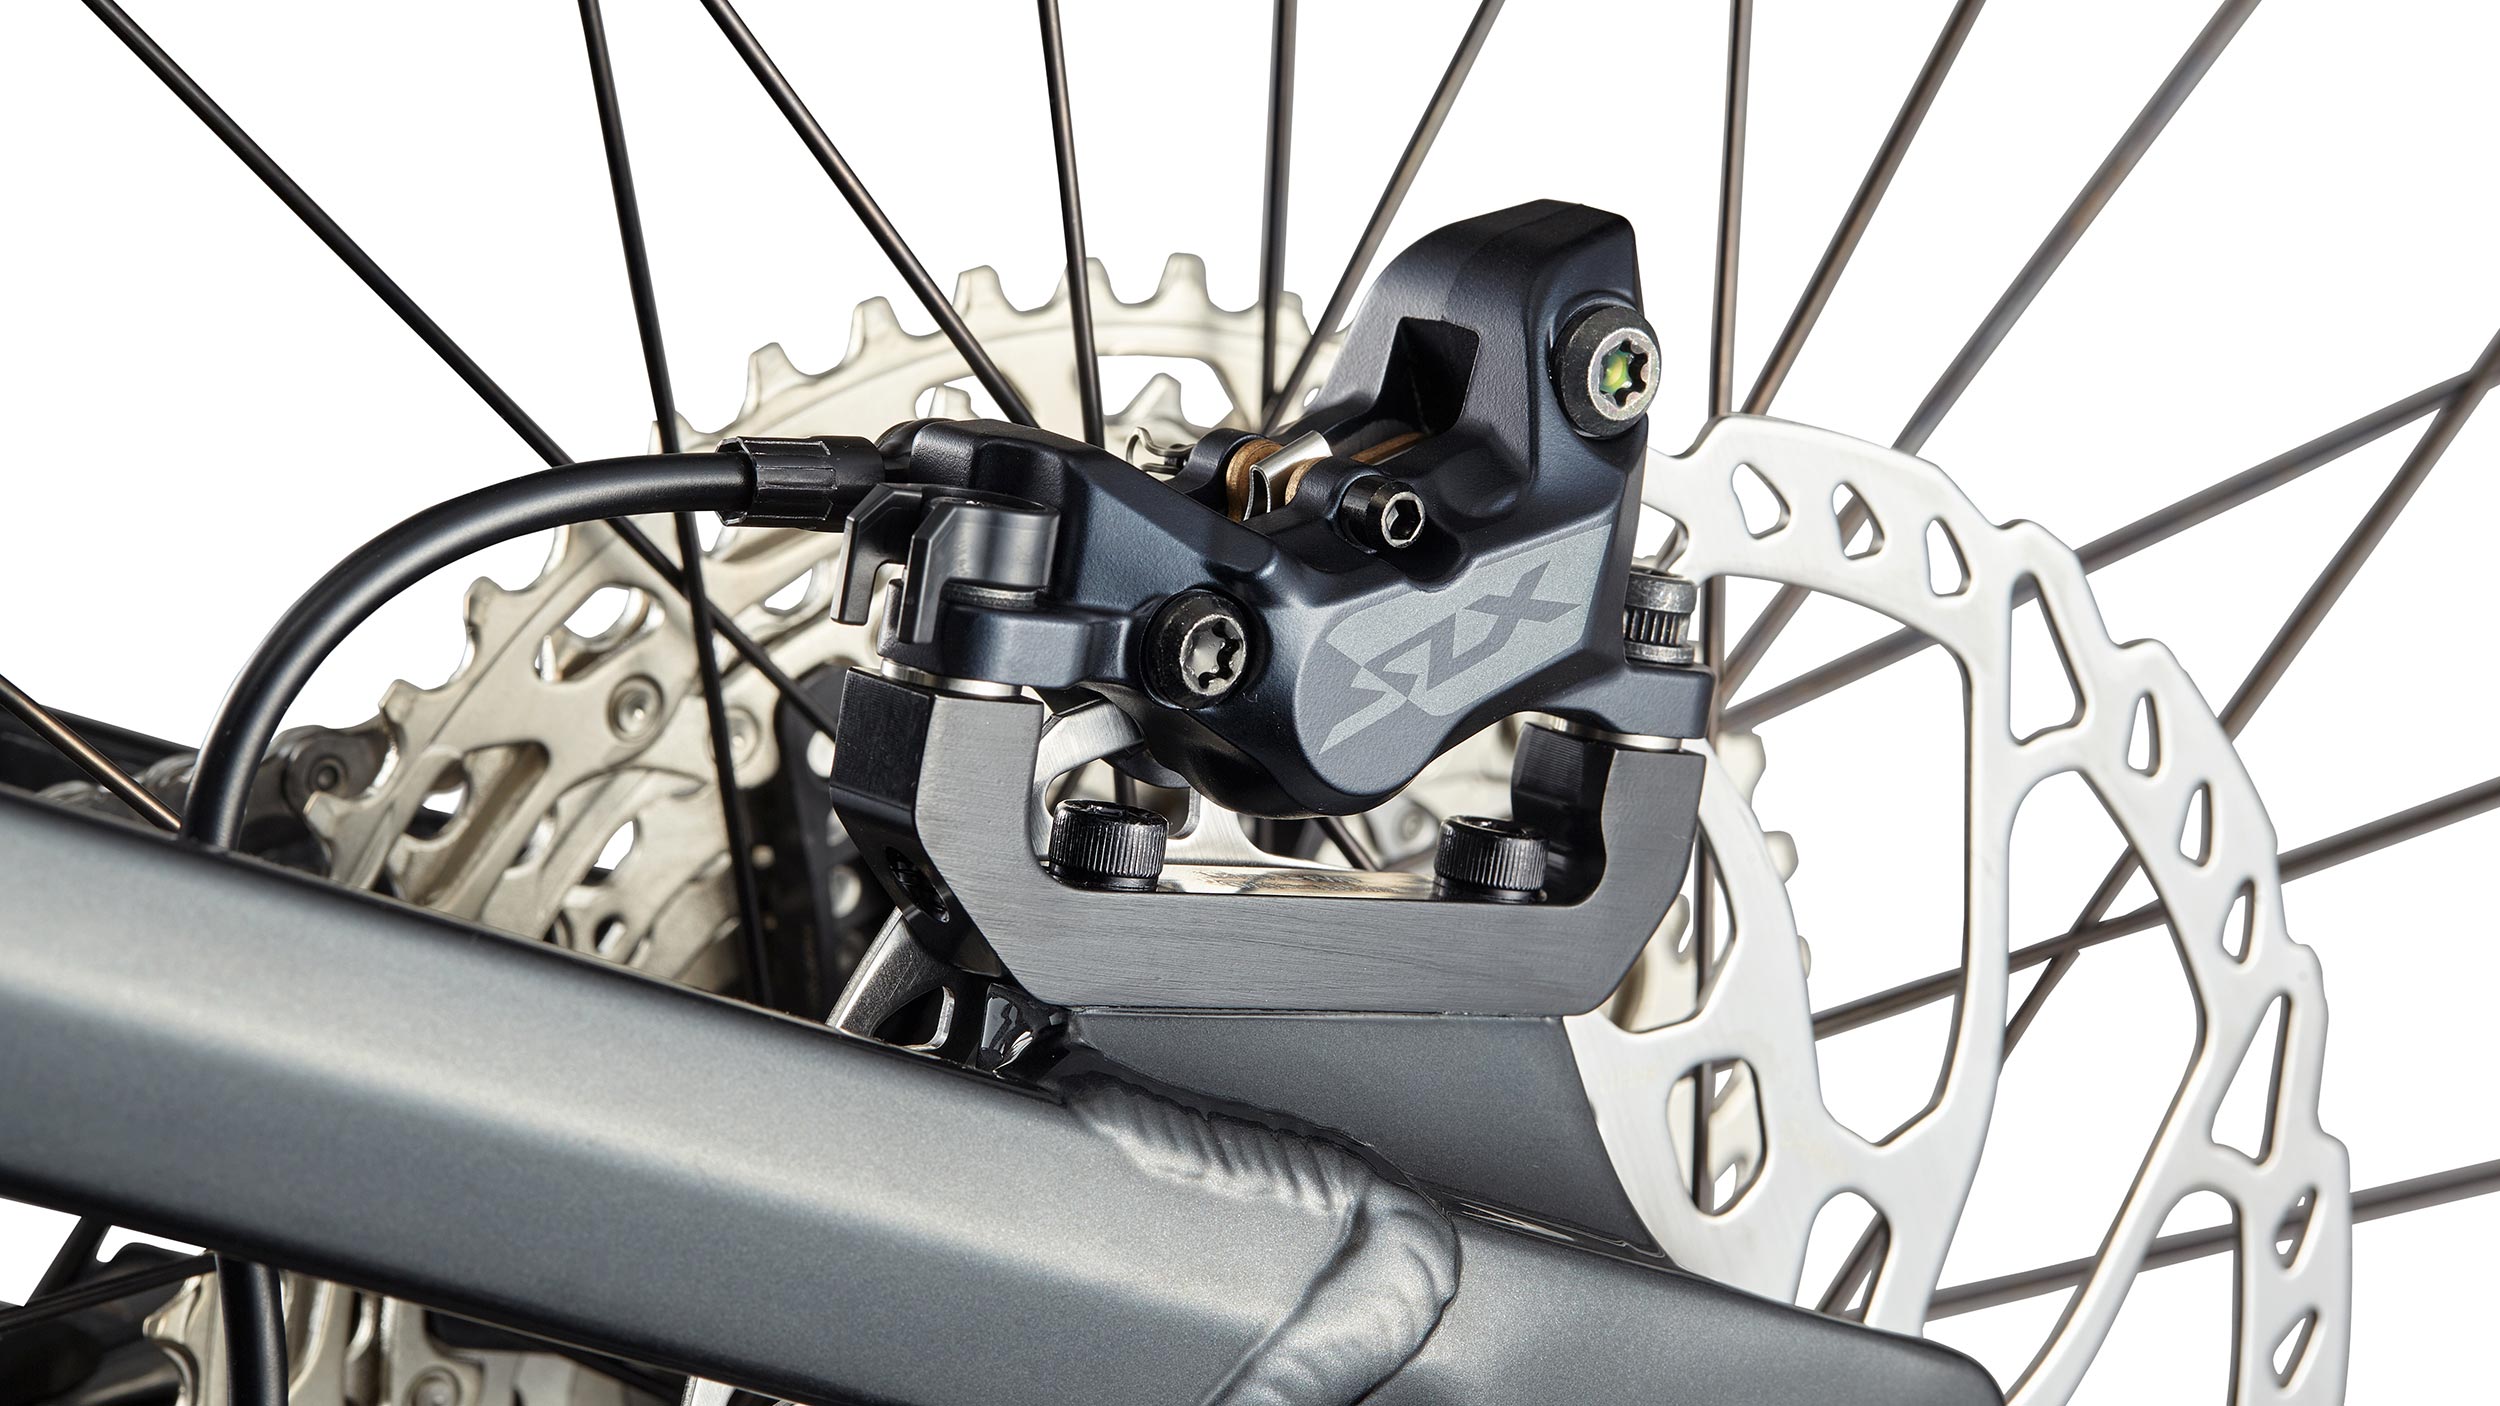 _caption_Experience reliable stopping power with the Shimano SLX Trail 4 Piston brakes, complemented by metal pads and 203mm rotors. 